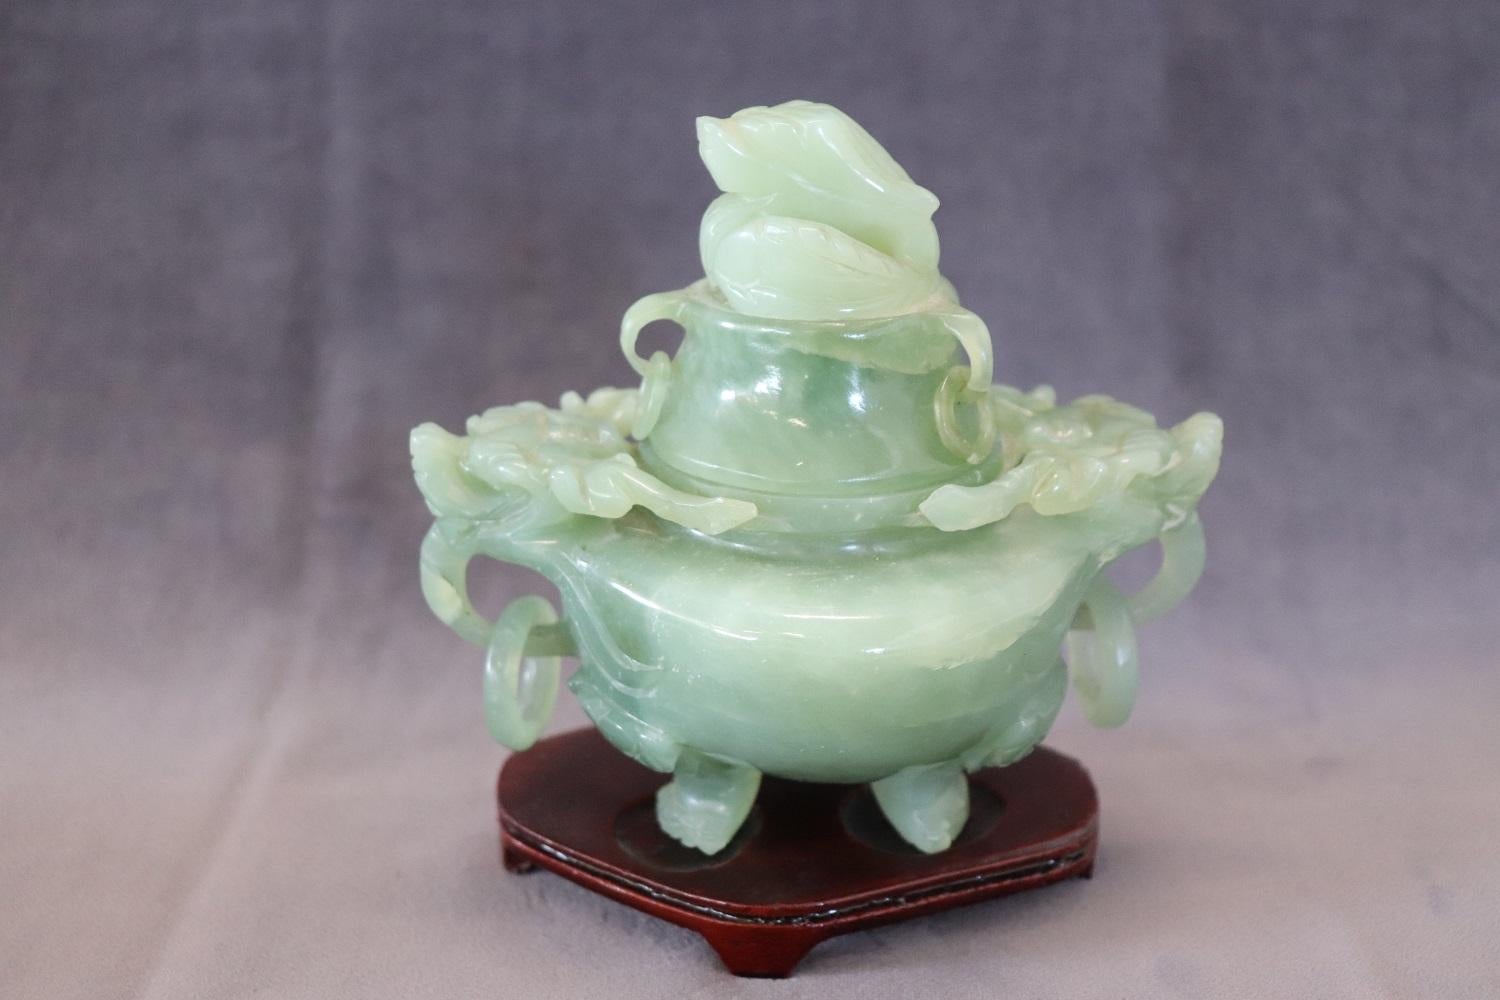 20th century Beautiful sculpture in precious green jade made in china. Fine censer with carved decorations. The censer rests on a wooden base. Perfect conditions.